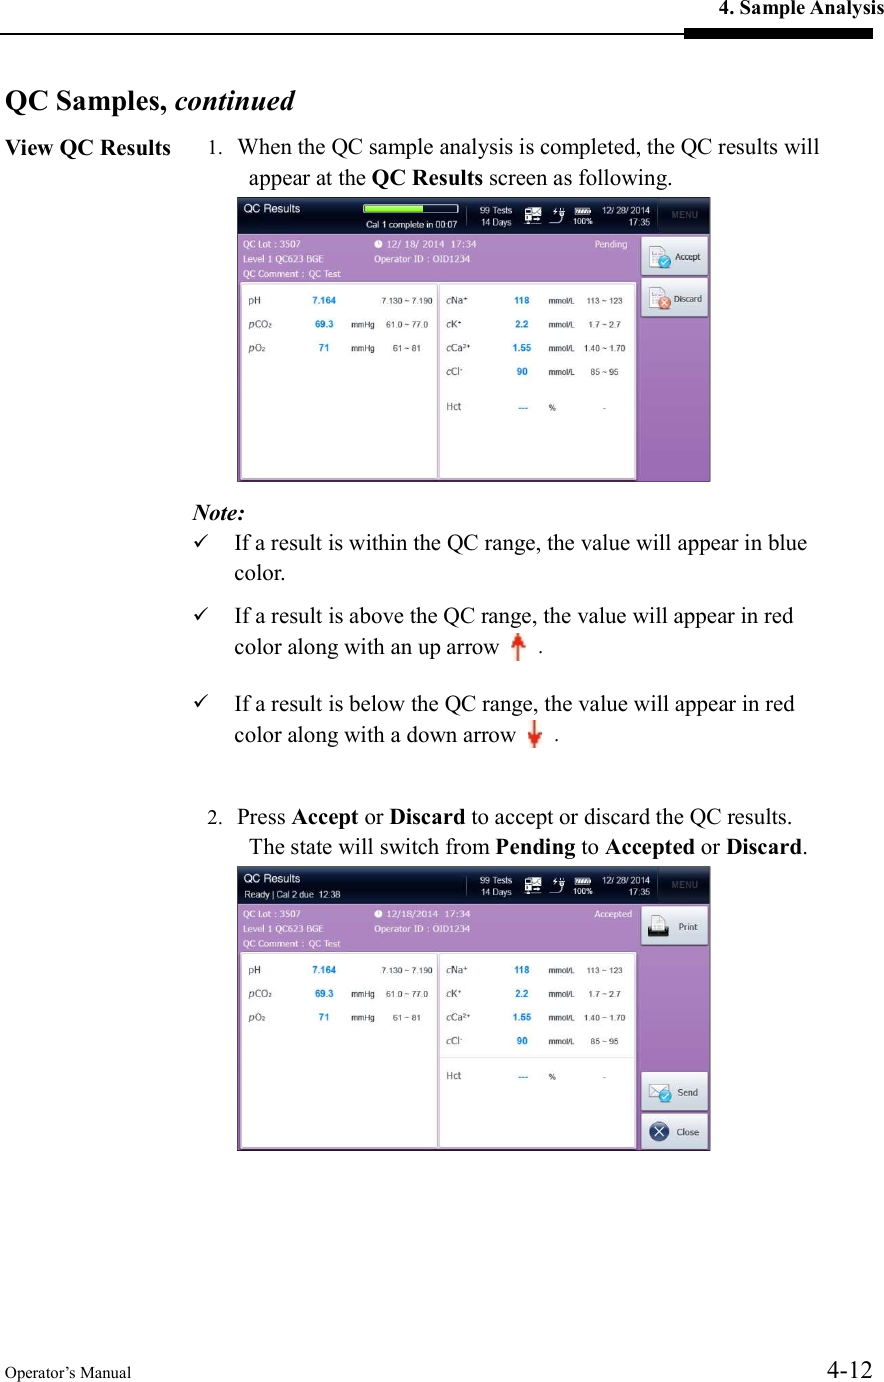 4. Sample Analysis Operator’s Manual  4-12  QC Samples, continued View QC Results  1. When the QC sample analysis is completed, the QC results will appear at the QC Results screen as following.  Note:  If a result is within the QC range, the value will appear in blue color.  If a result is above the QC range, the value will appear in red color along with an up arrow    .  If a result is below the QC range, the value will appear in red color along with a down arrow   .  2. Press Accept or Discard to accept or discard the QC results.   The state will switch from Pending to Accepted or Discard.     